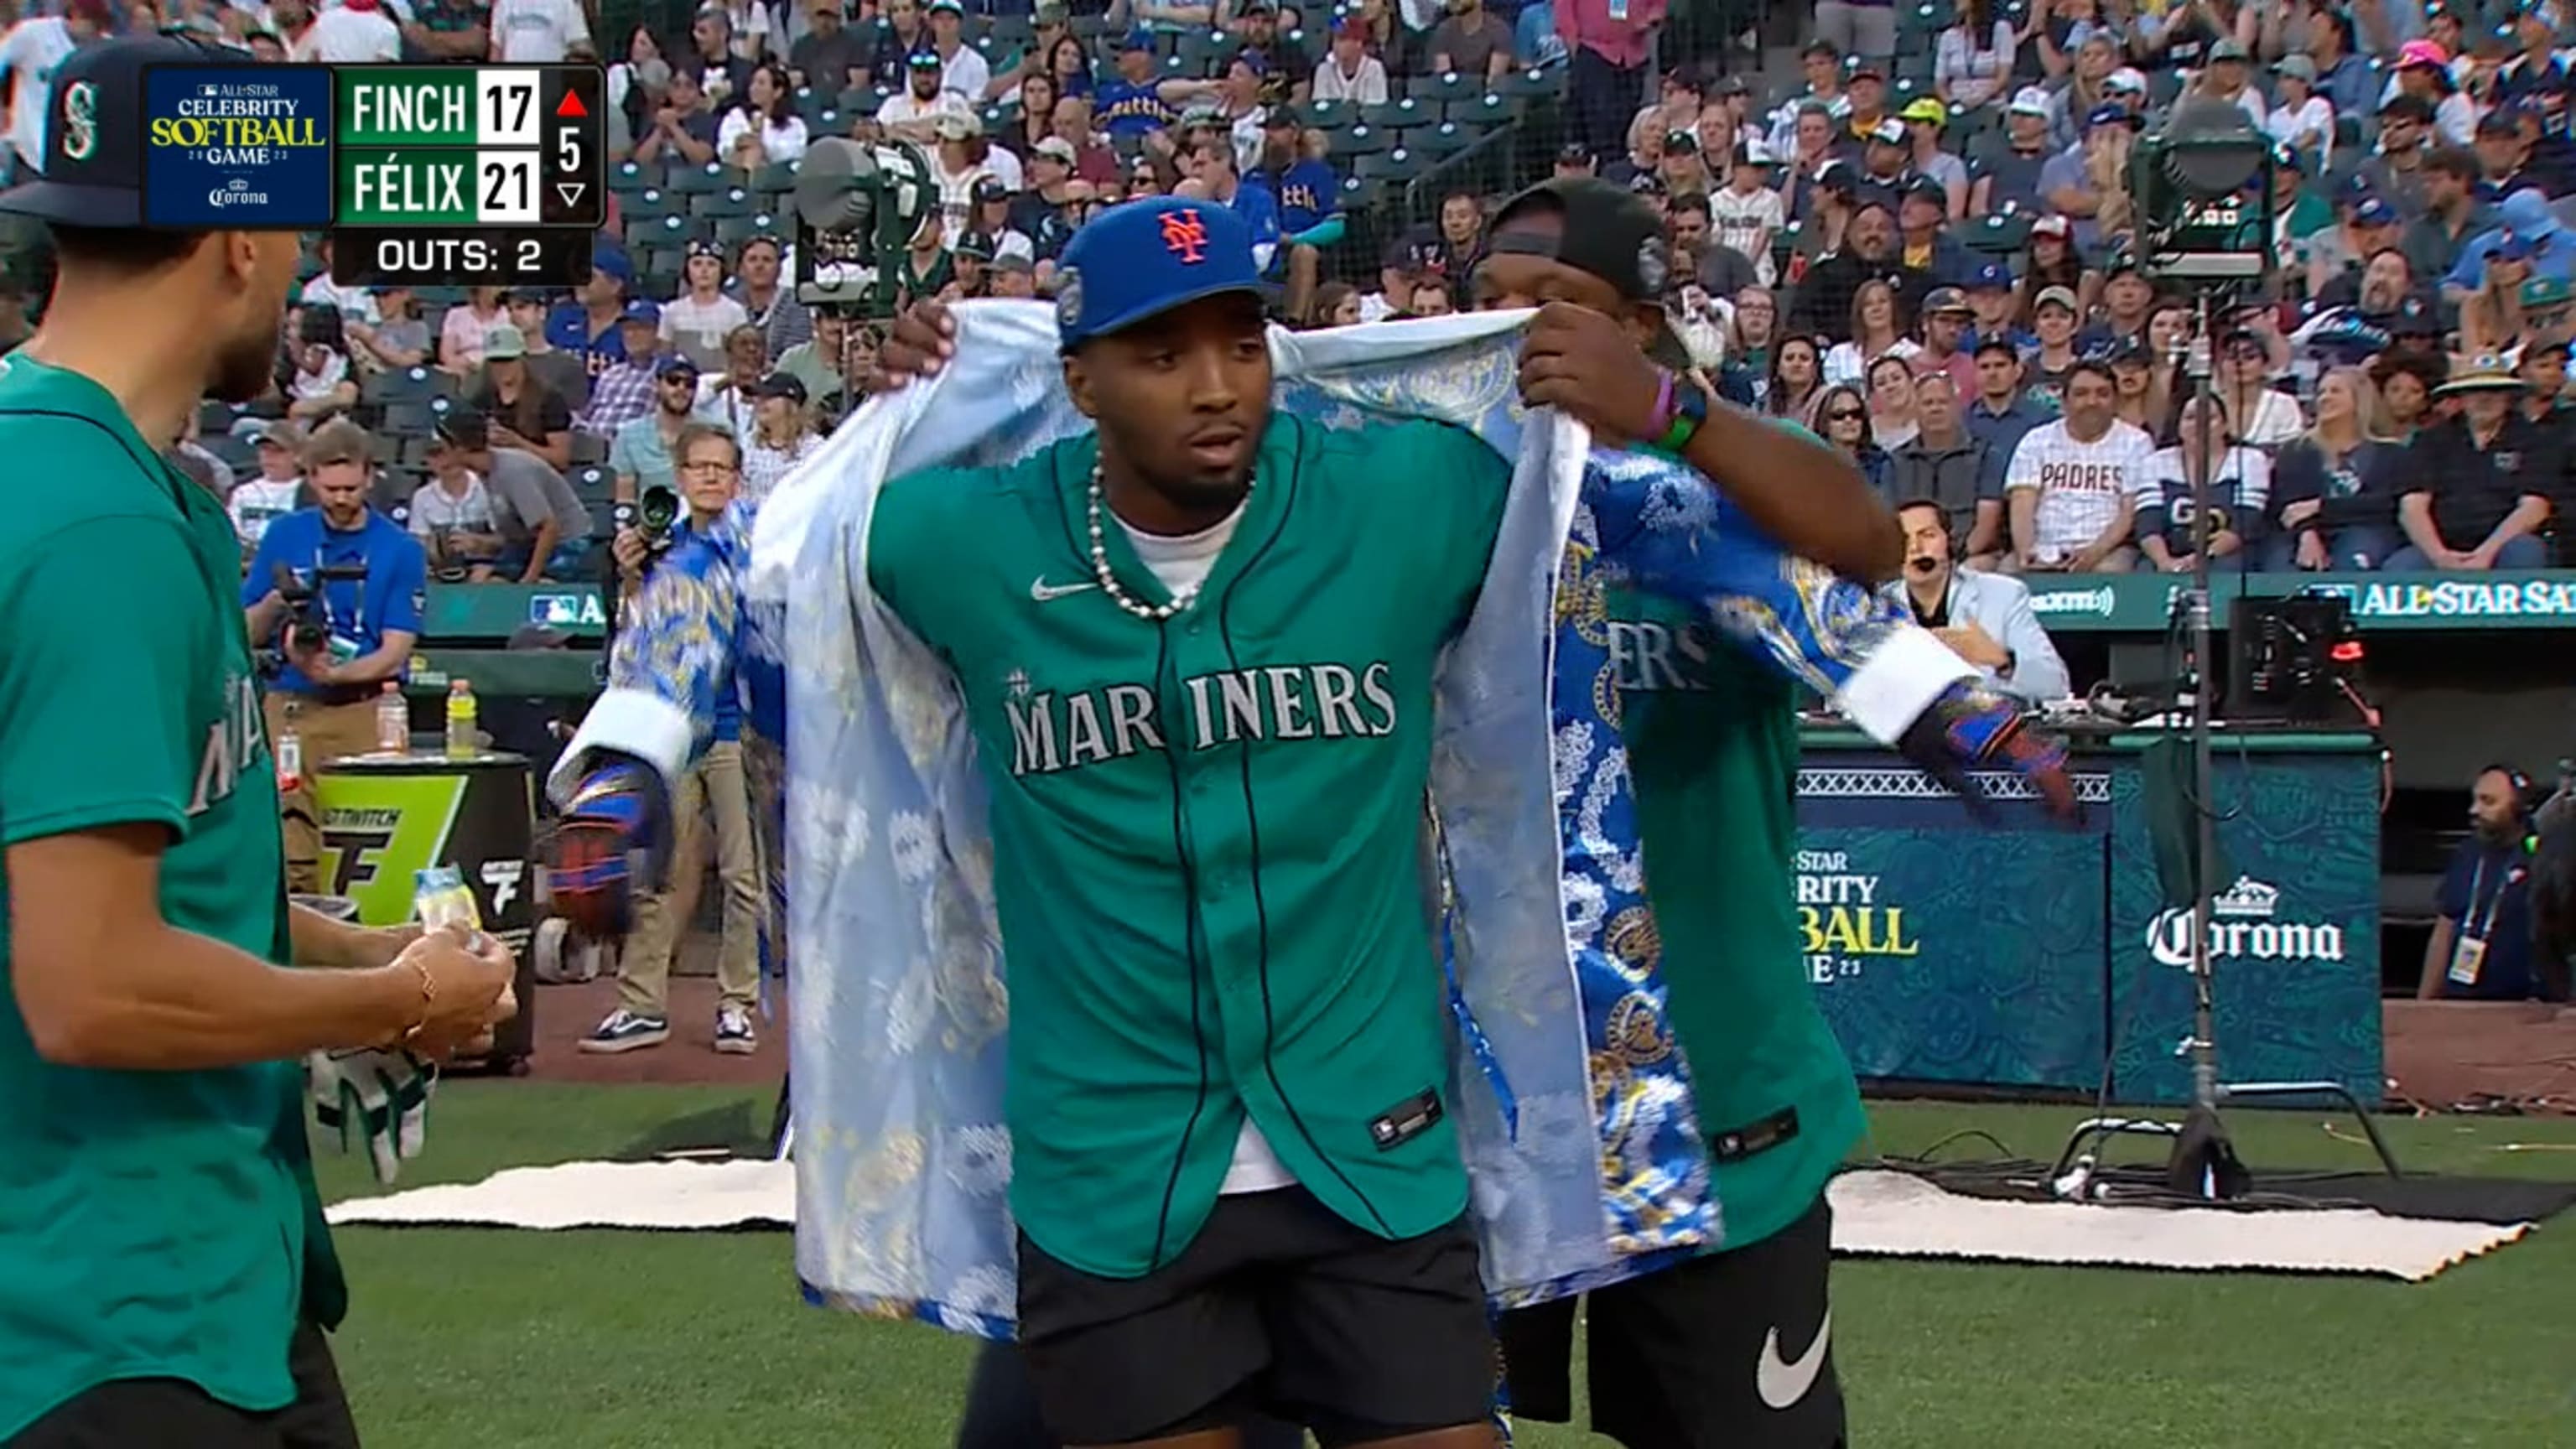 Best moments from the 2022 All-Star Celebrity Softball Game